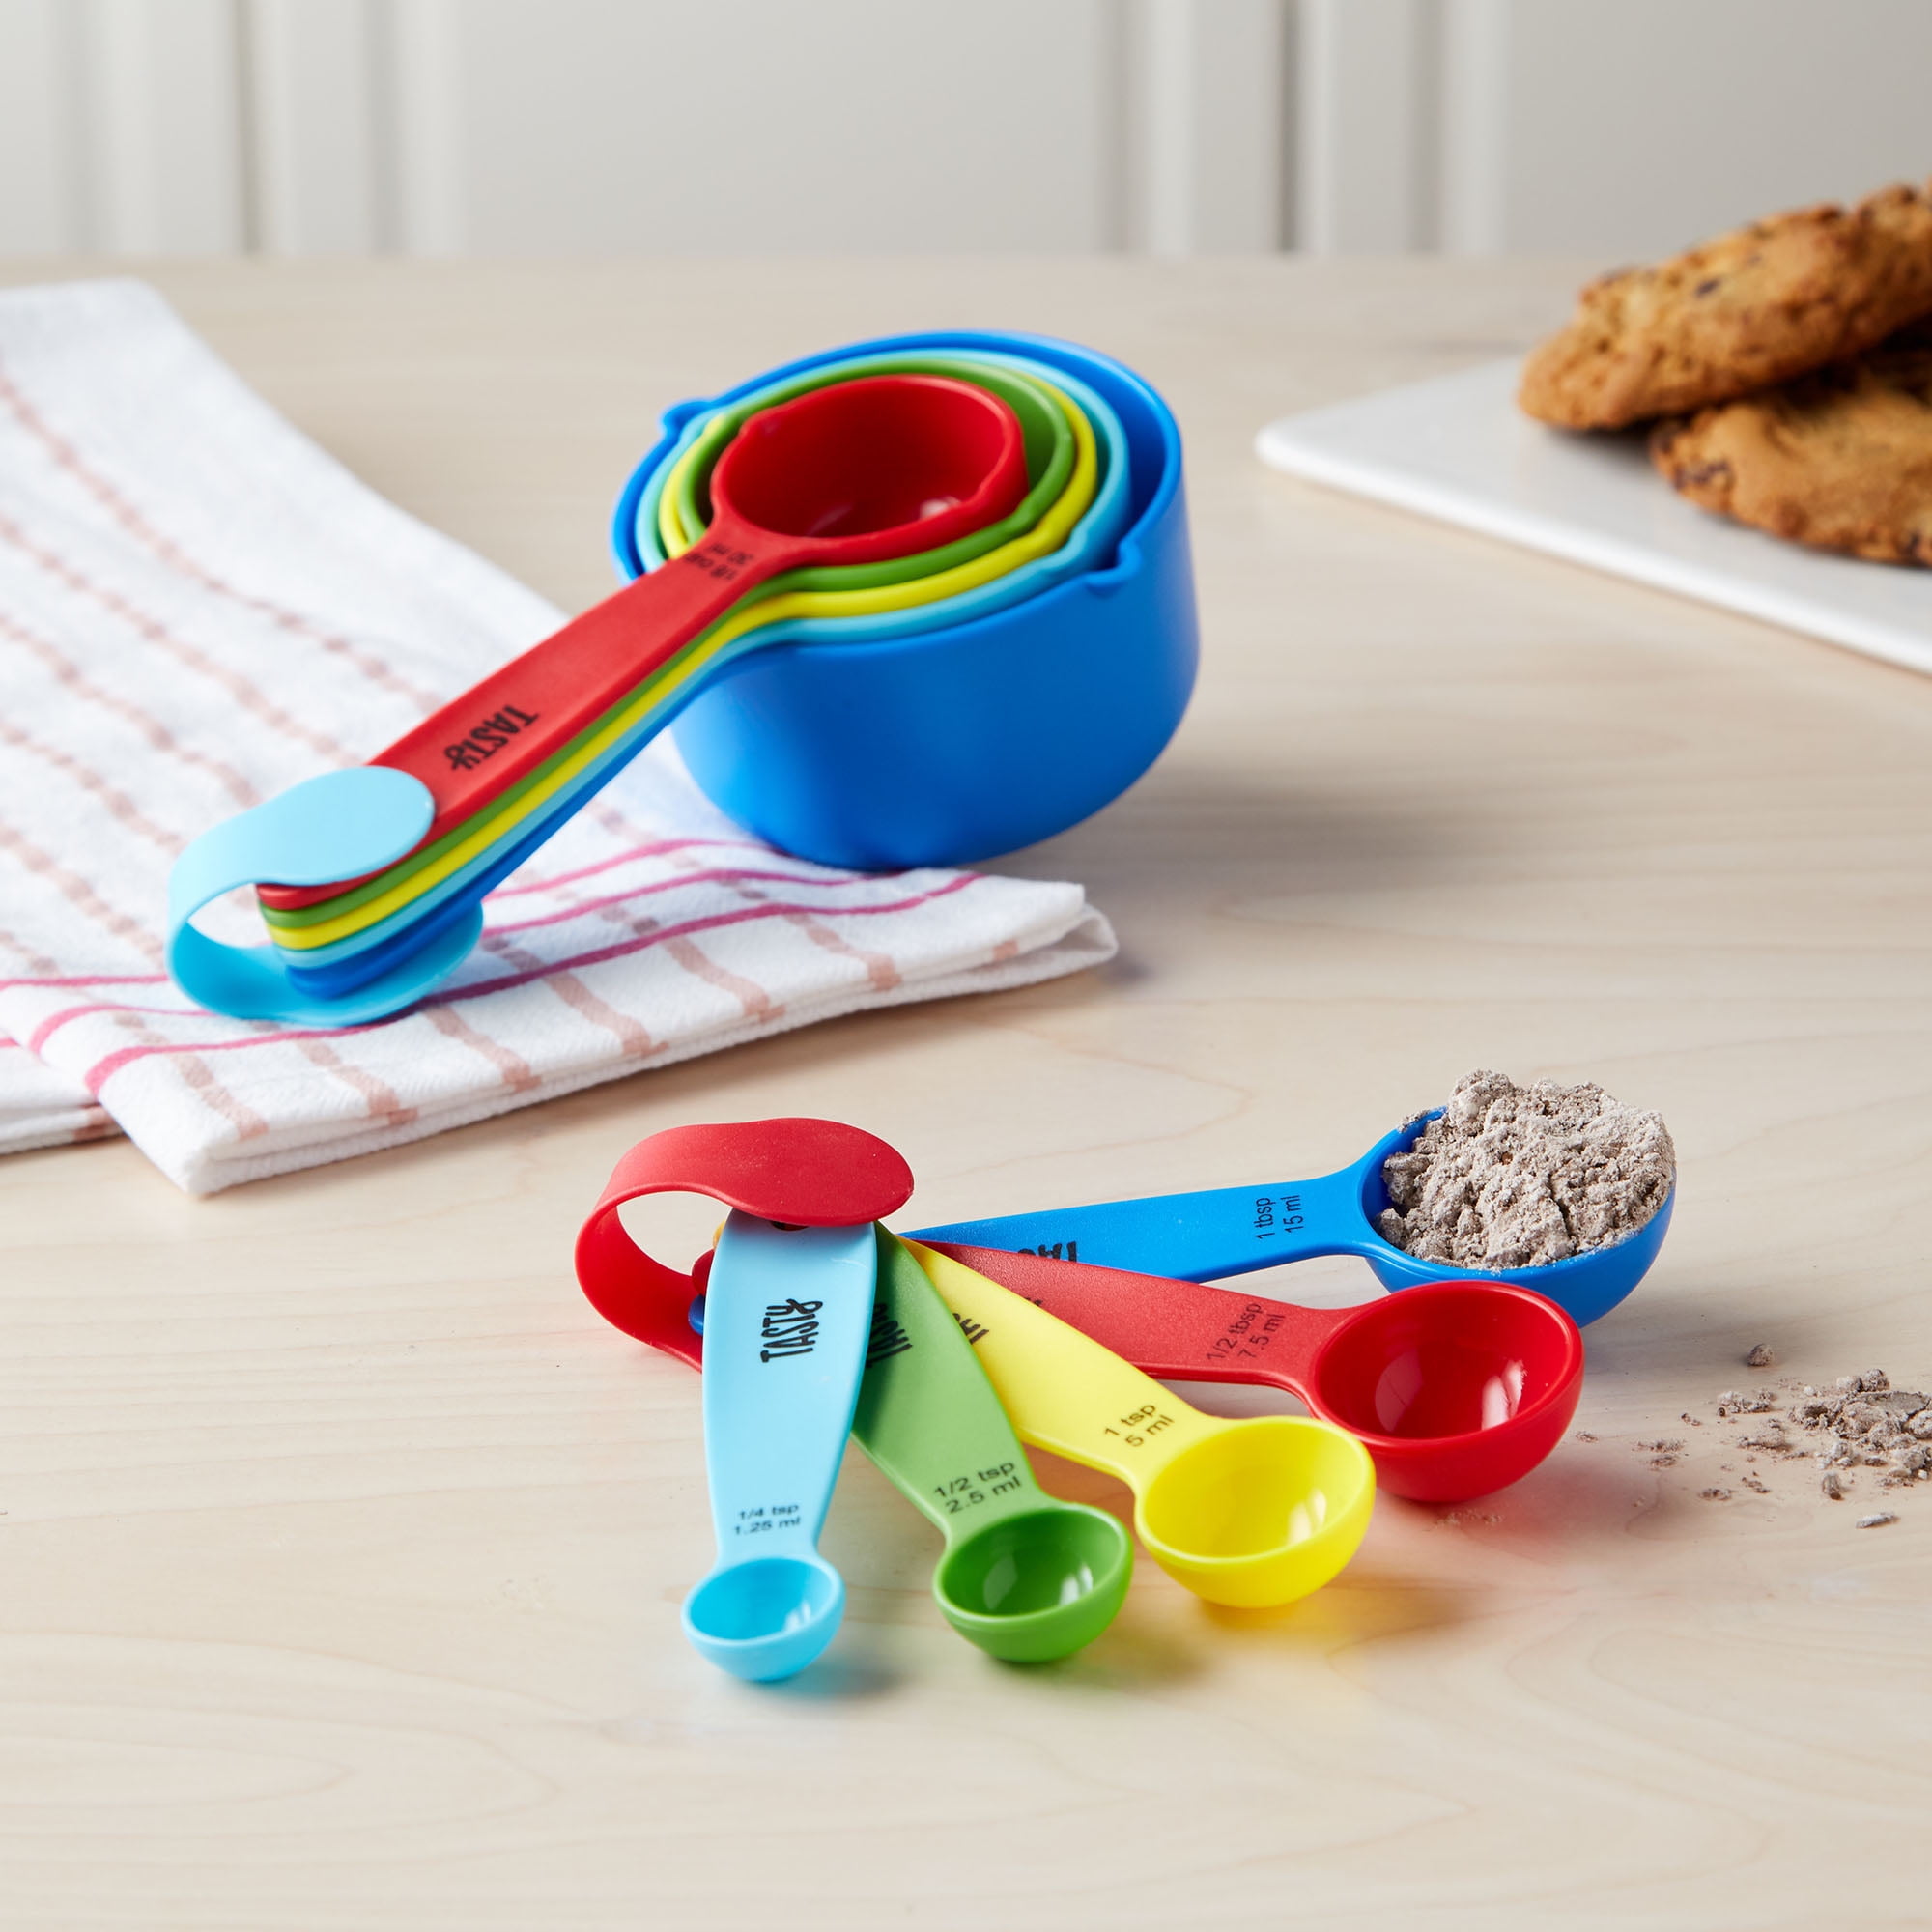 Measuring Cup and Spoon Set – The Convenient Kitchen